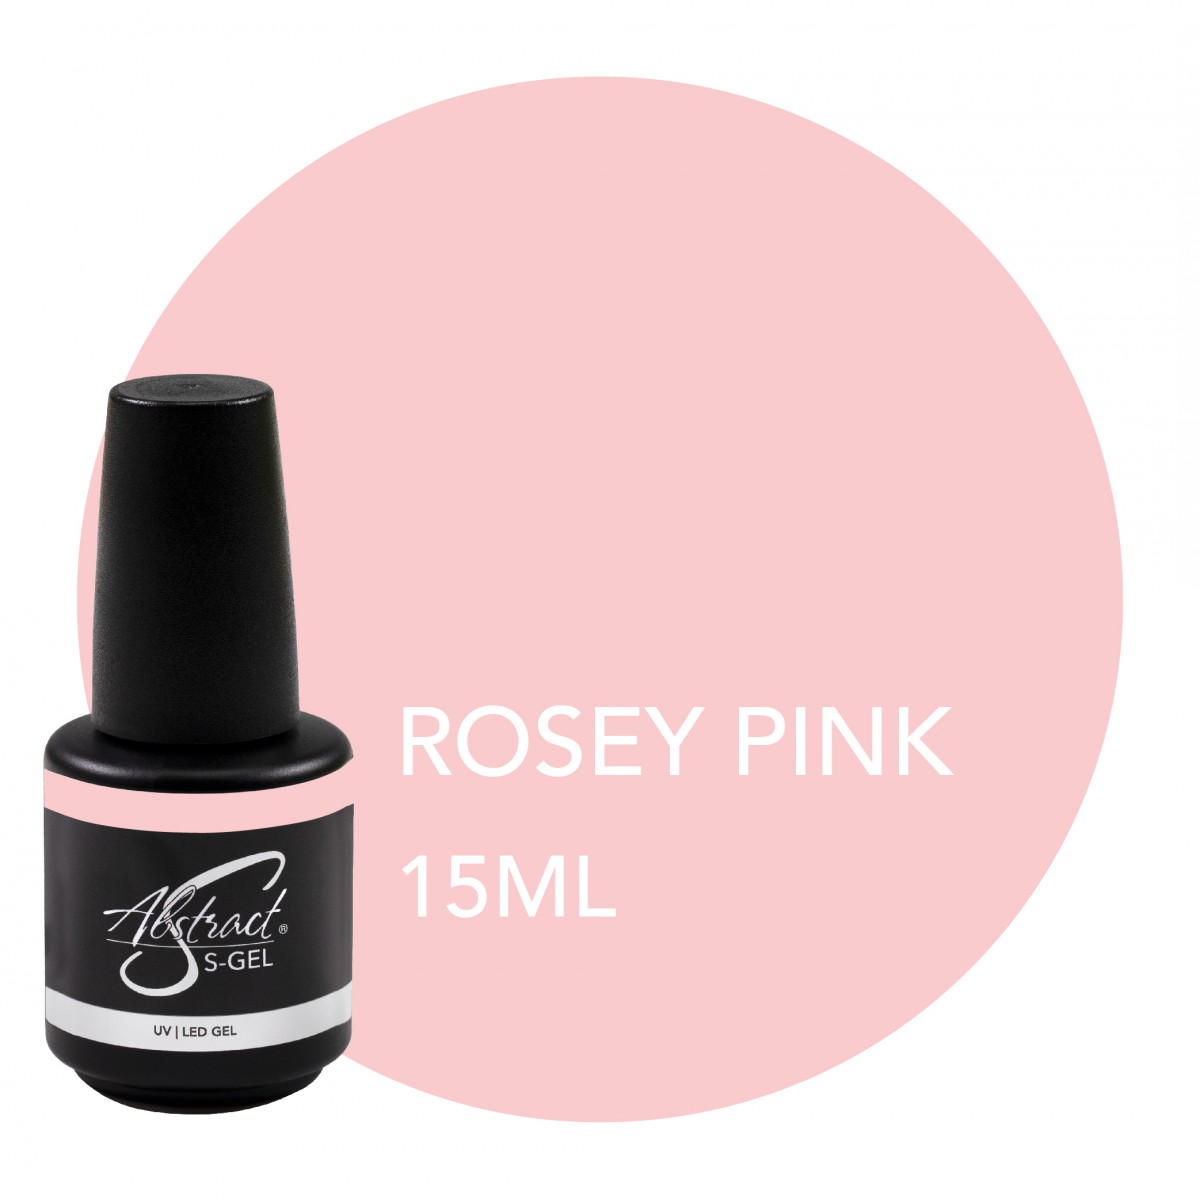 Abstract S-Gel Rosey Pink